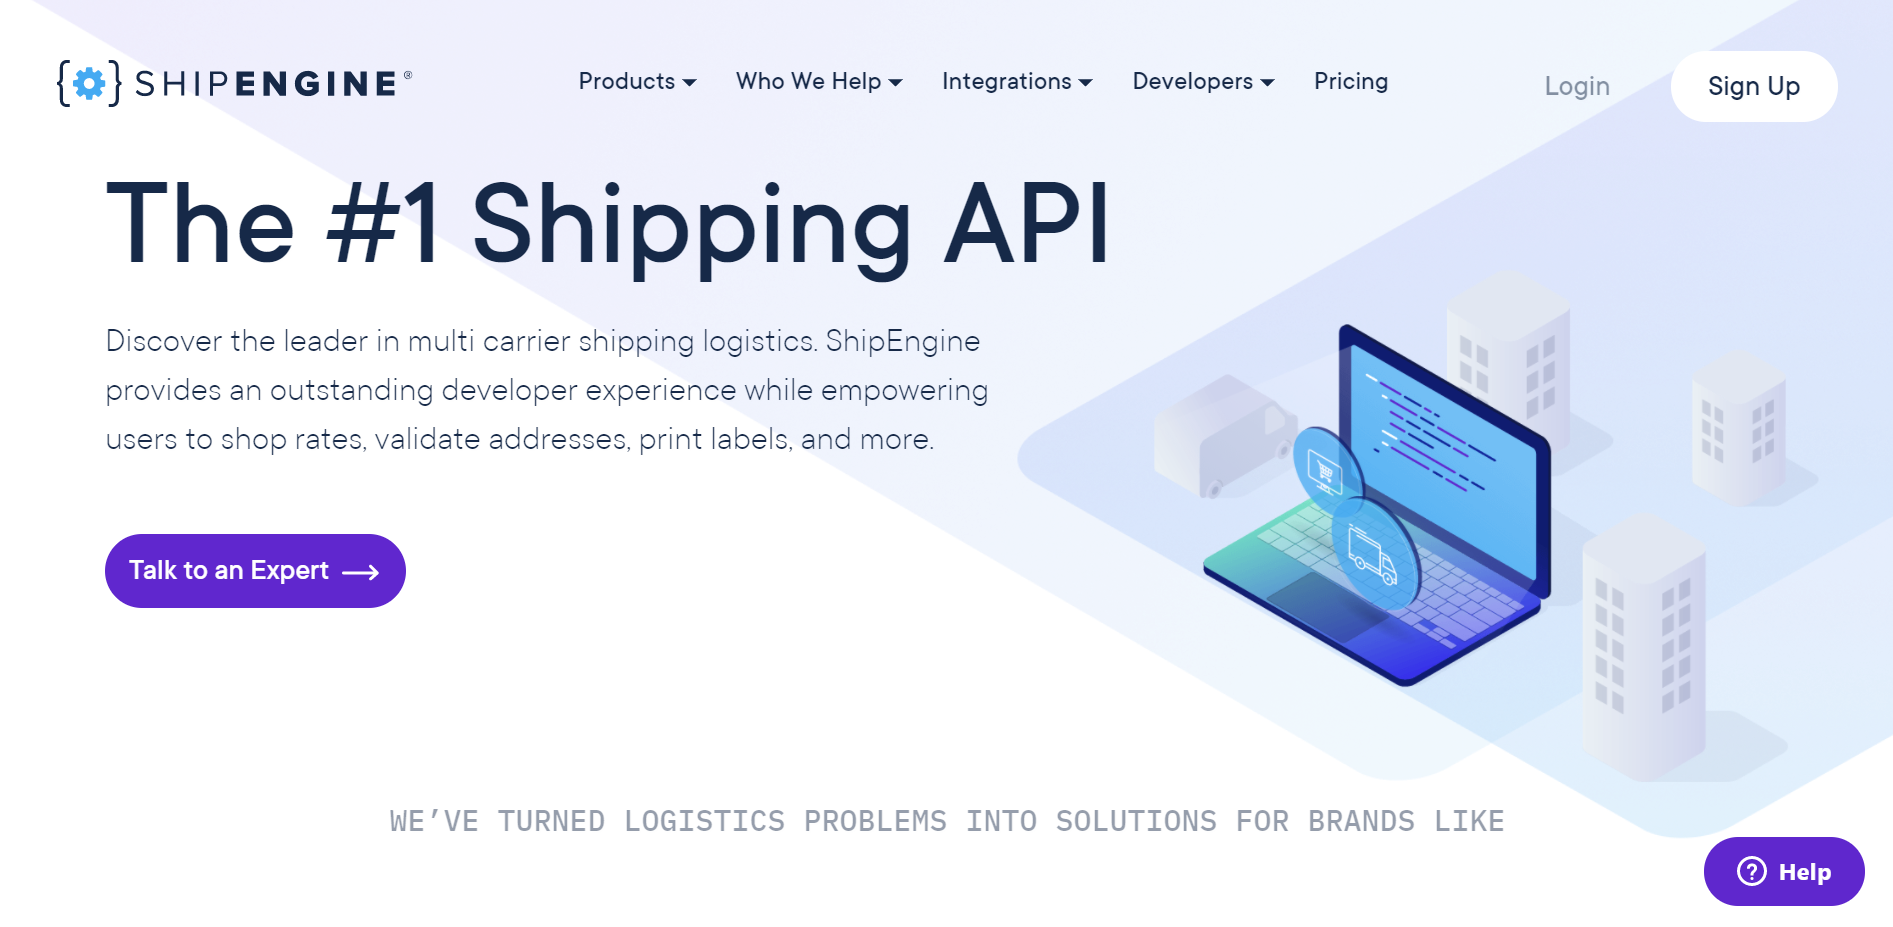 How to register for a ShipEngine account